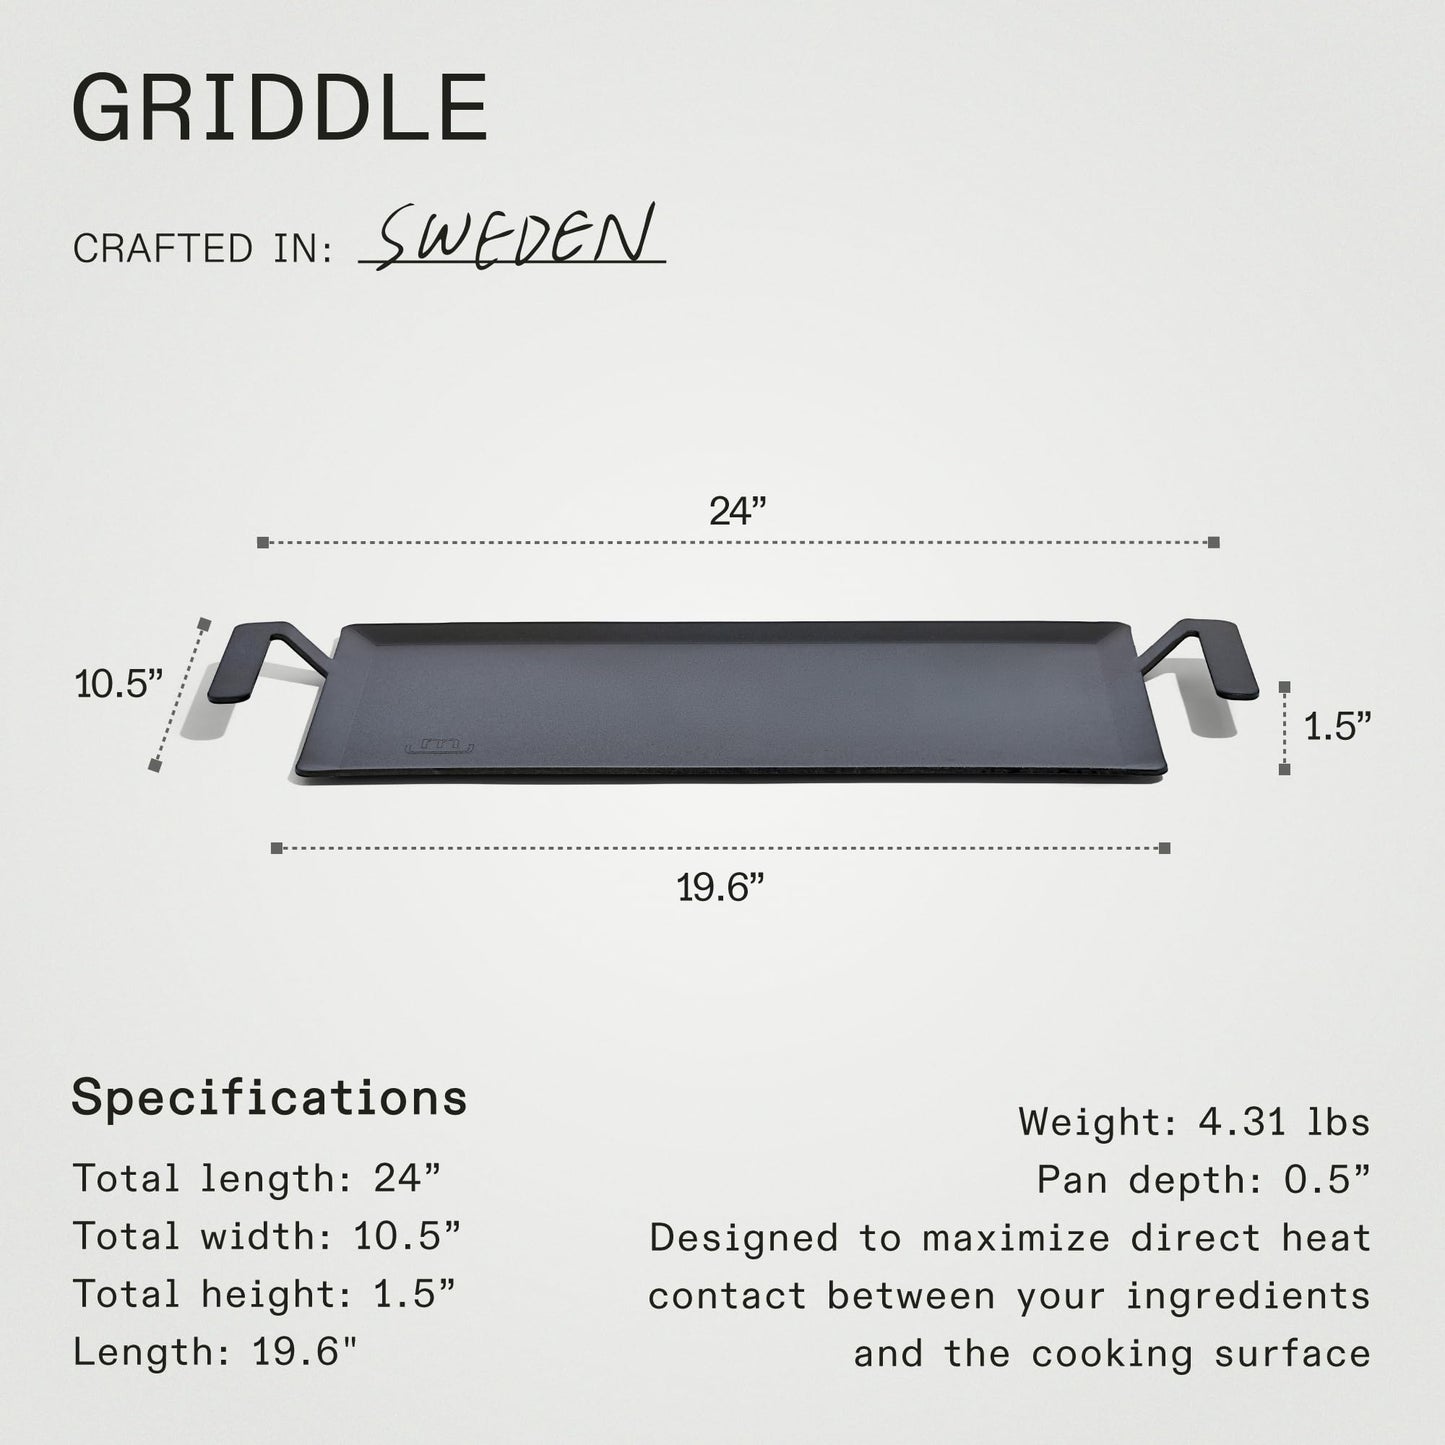 Made In Cookware - Carbon Steel Griddle - (Like Cast Iron, but Better) - Professional Cookware - Crafted in Sweden - Induction Compatible